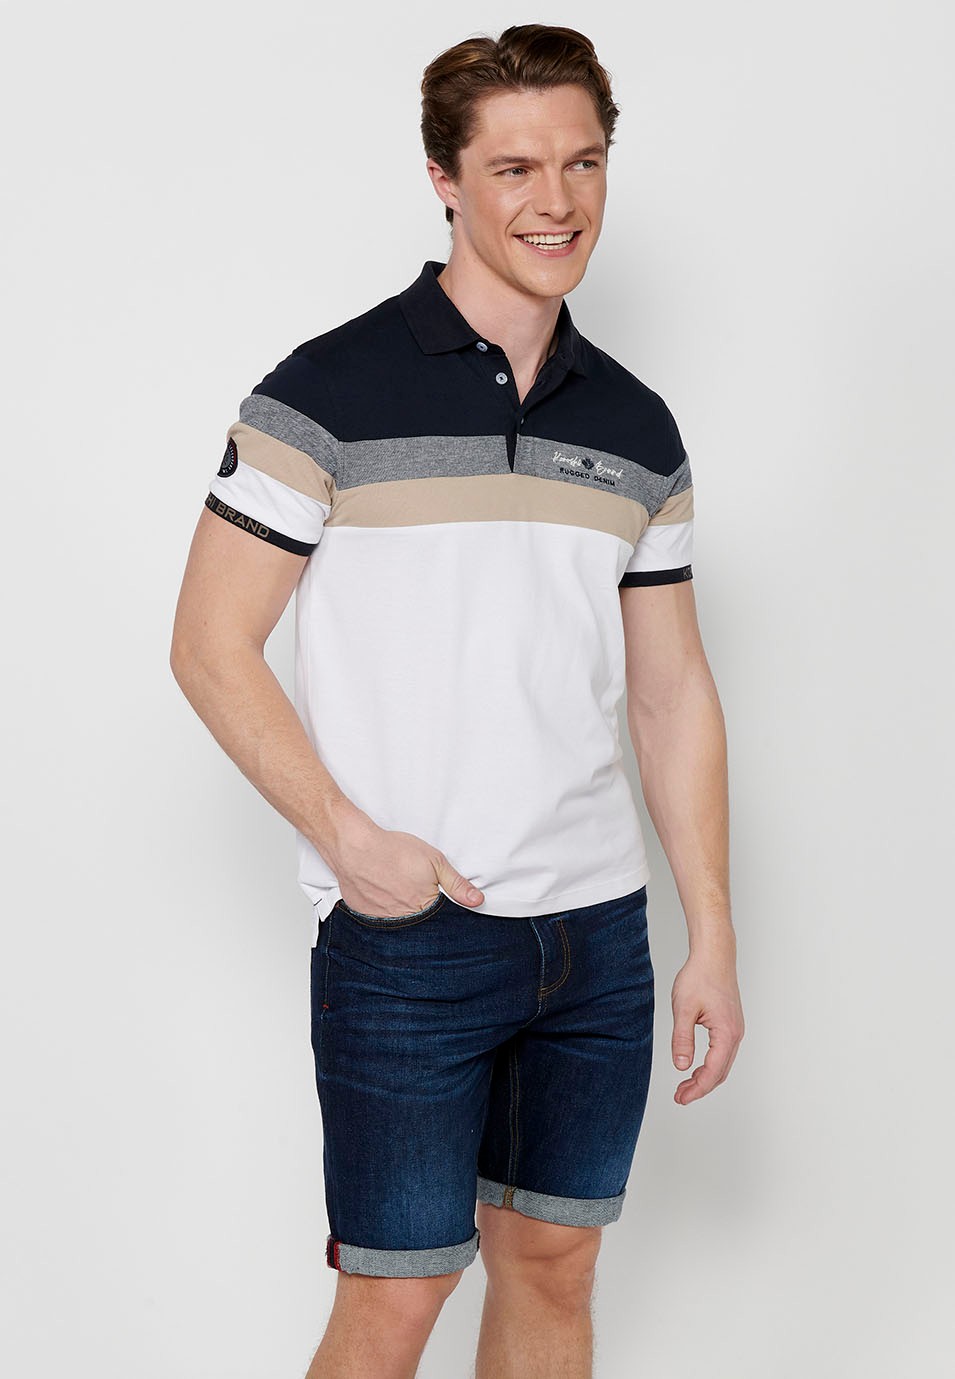 100% cotton short-sleeved polo shirt, striped detail on the chest, white color for men